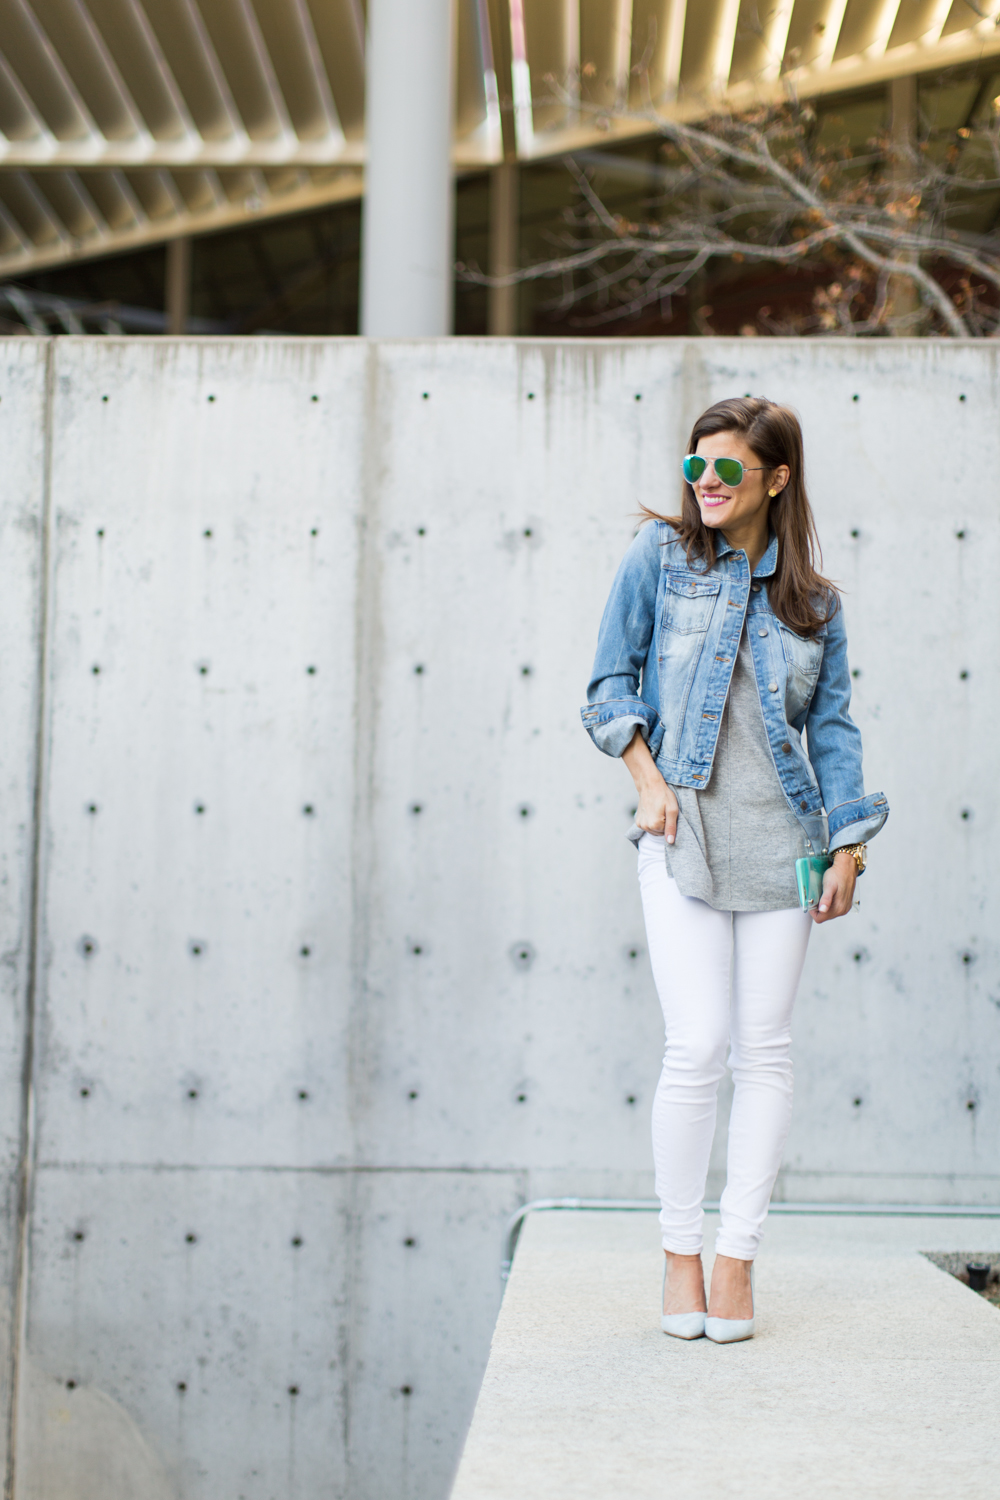 winter white jeans outfit, white jeans and grey sweater, white jeans and denim jacket, how to wear white jeans after labor day